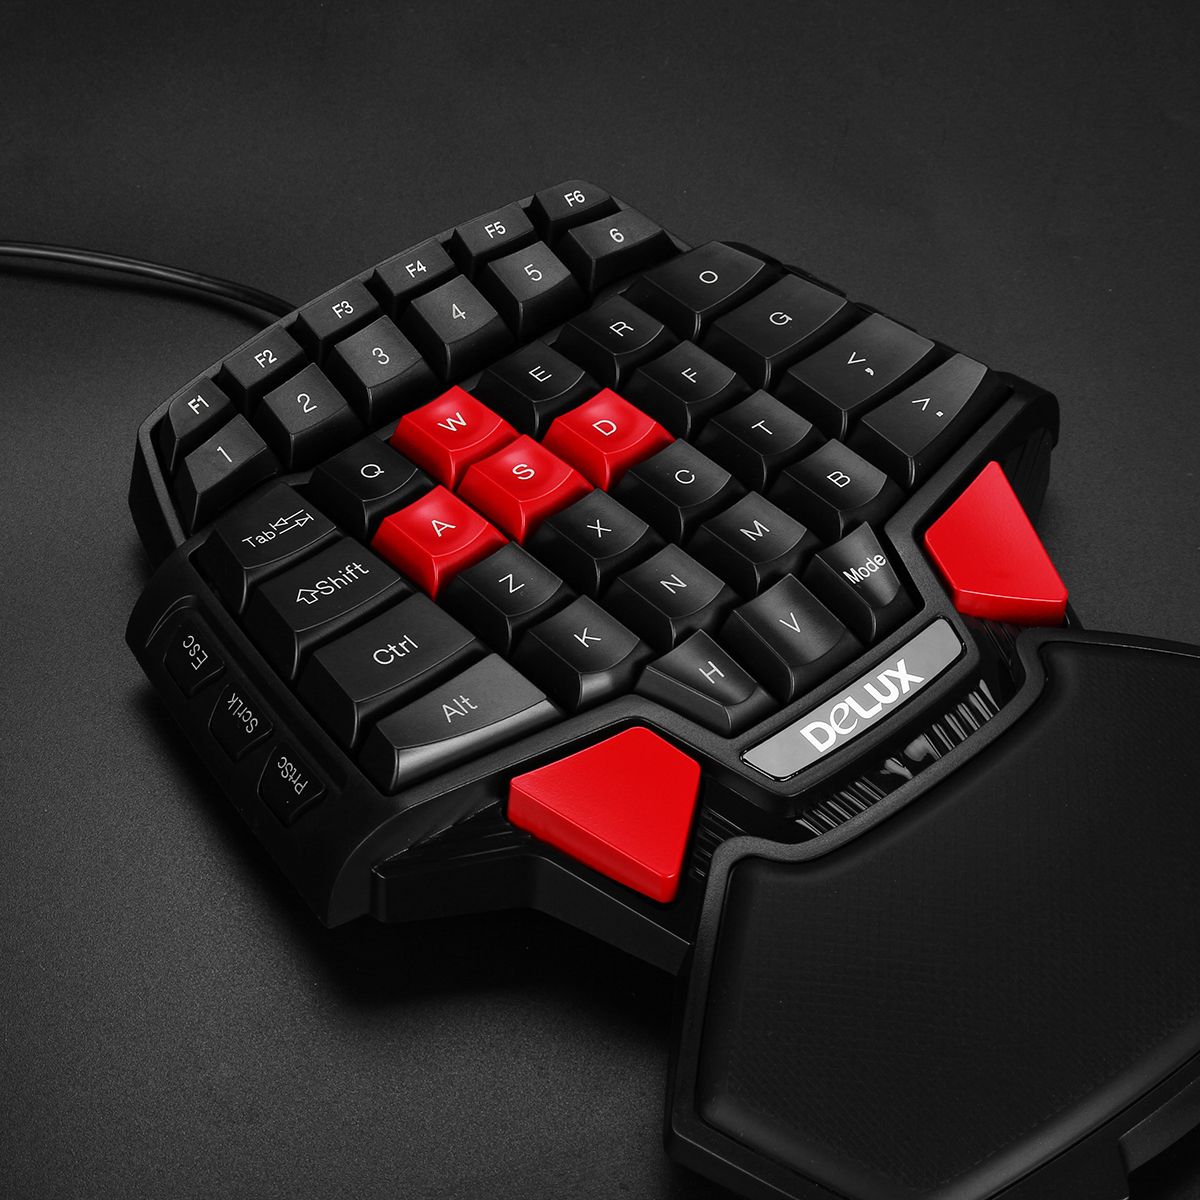 Single-Hand-Gaming-Keyboard-USB-Wired-Keypad-3200-dpi-Mouse-for-PS4-PC-Game-One-handed-Ergonomic-Key-1716549